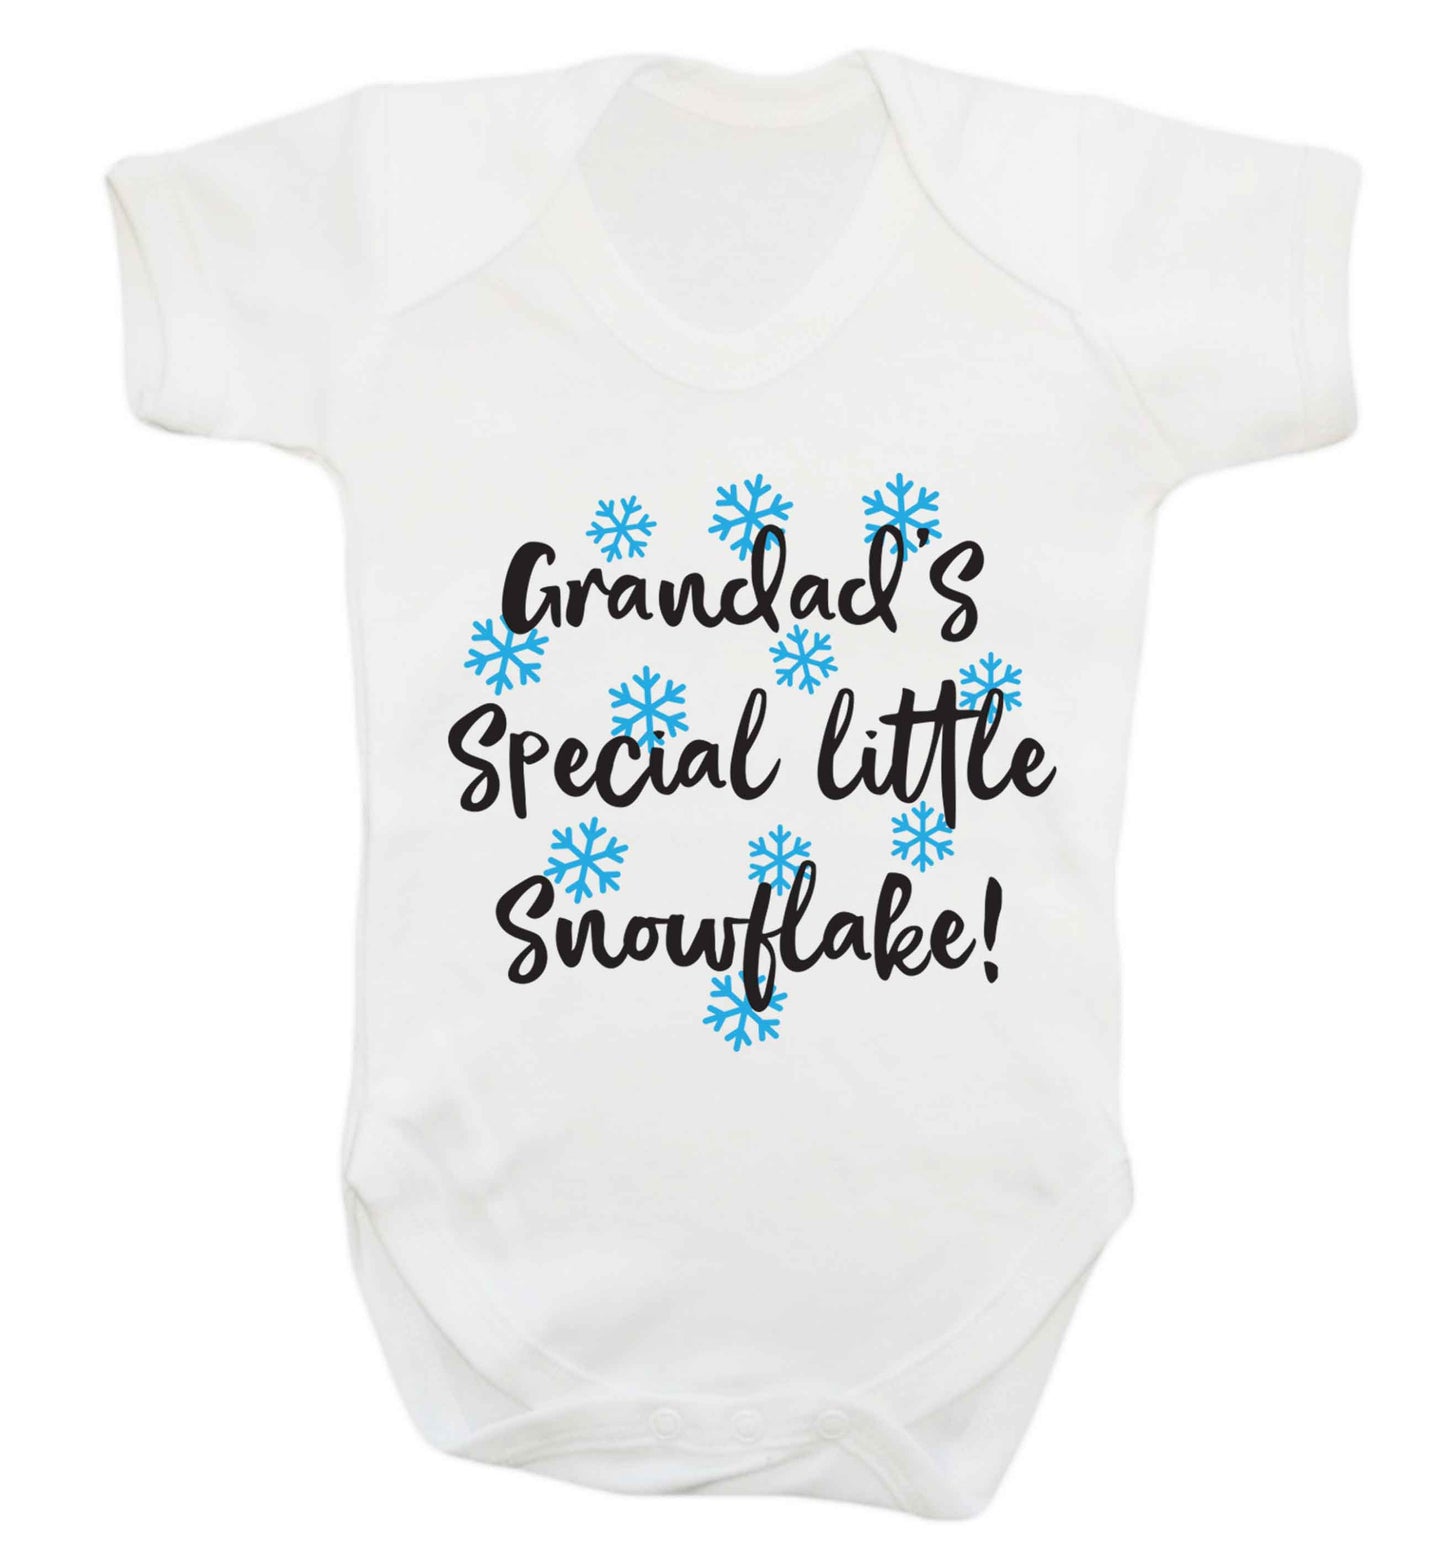 Grandad's special little snowflake Baby Vest white 18-24 months